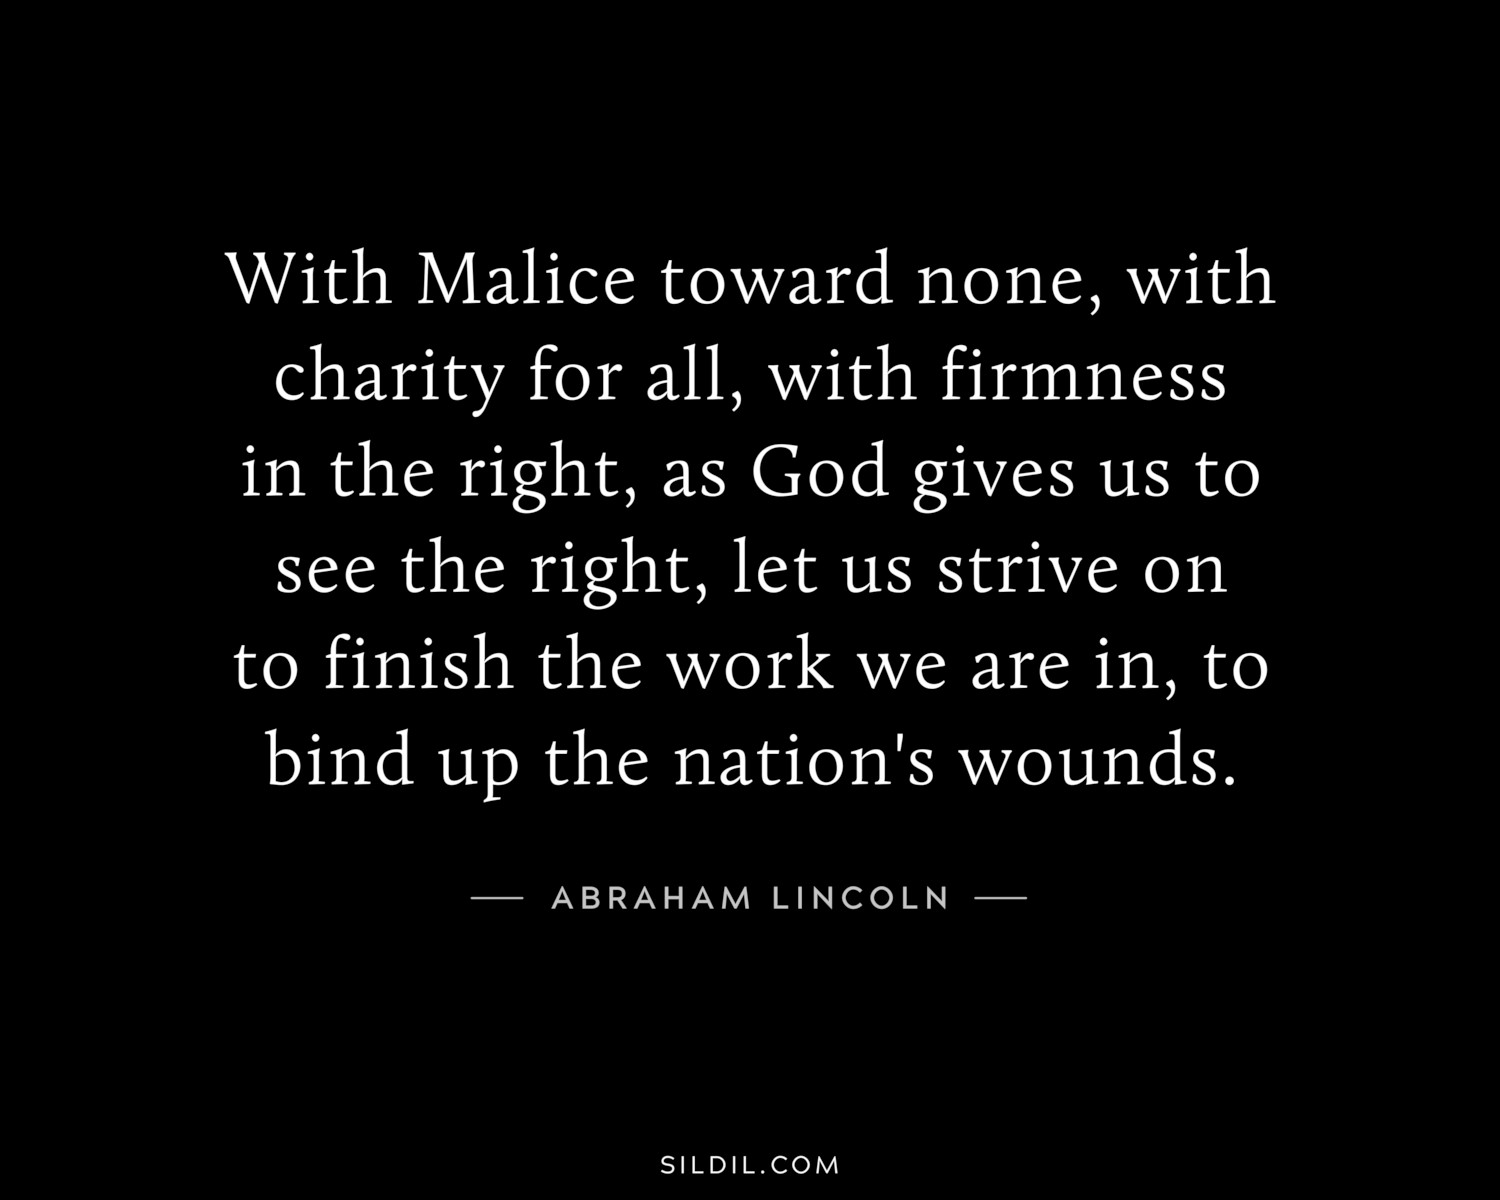 With Malice toward none, with charity for all, with firmness in the right, as God gives us to see the right, let us strive on to finish the work we are in, to bind up the nation's wounds.